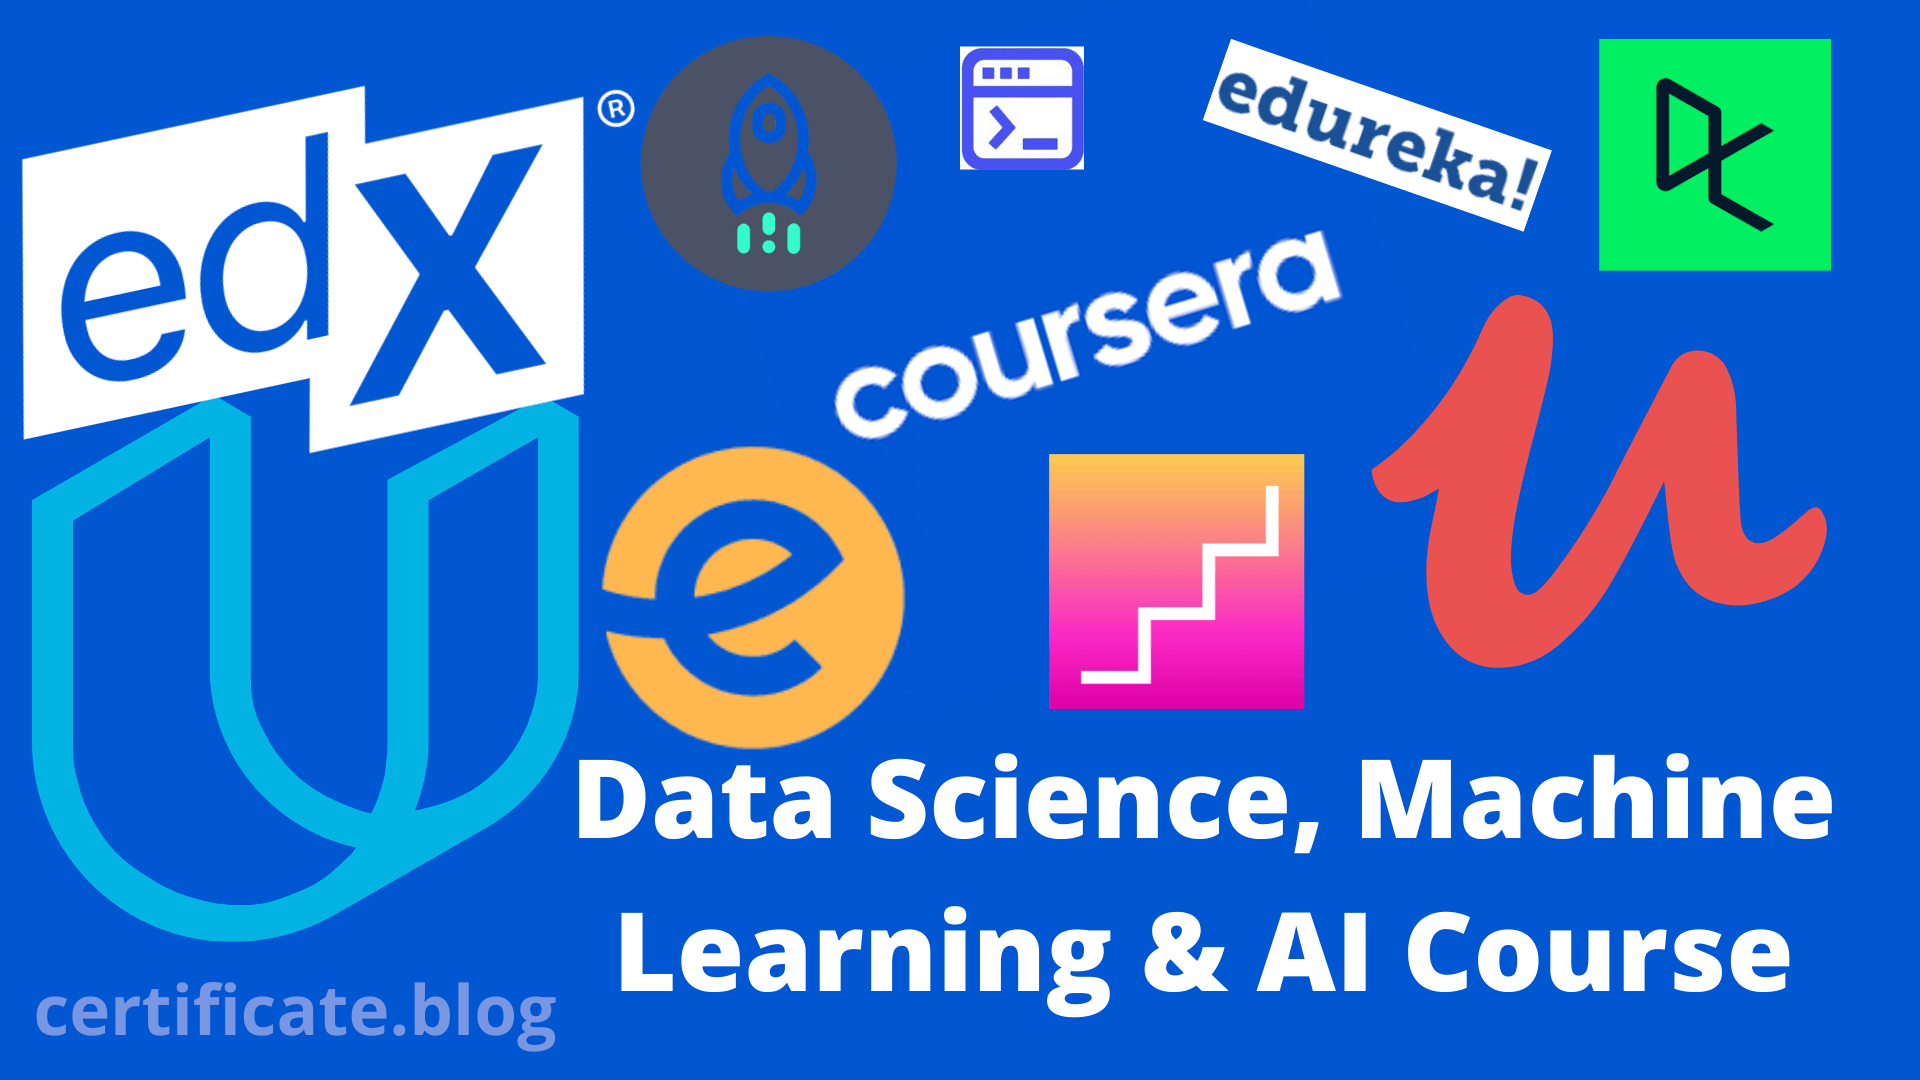 Data Science, Machine Learning & AI Course